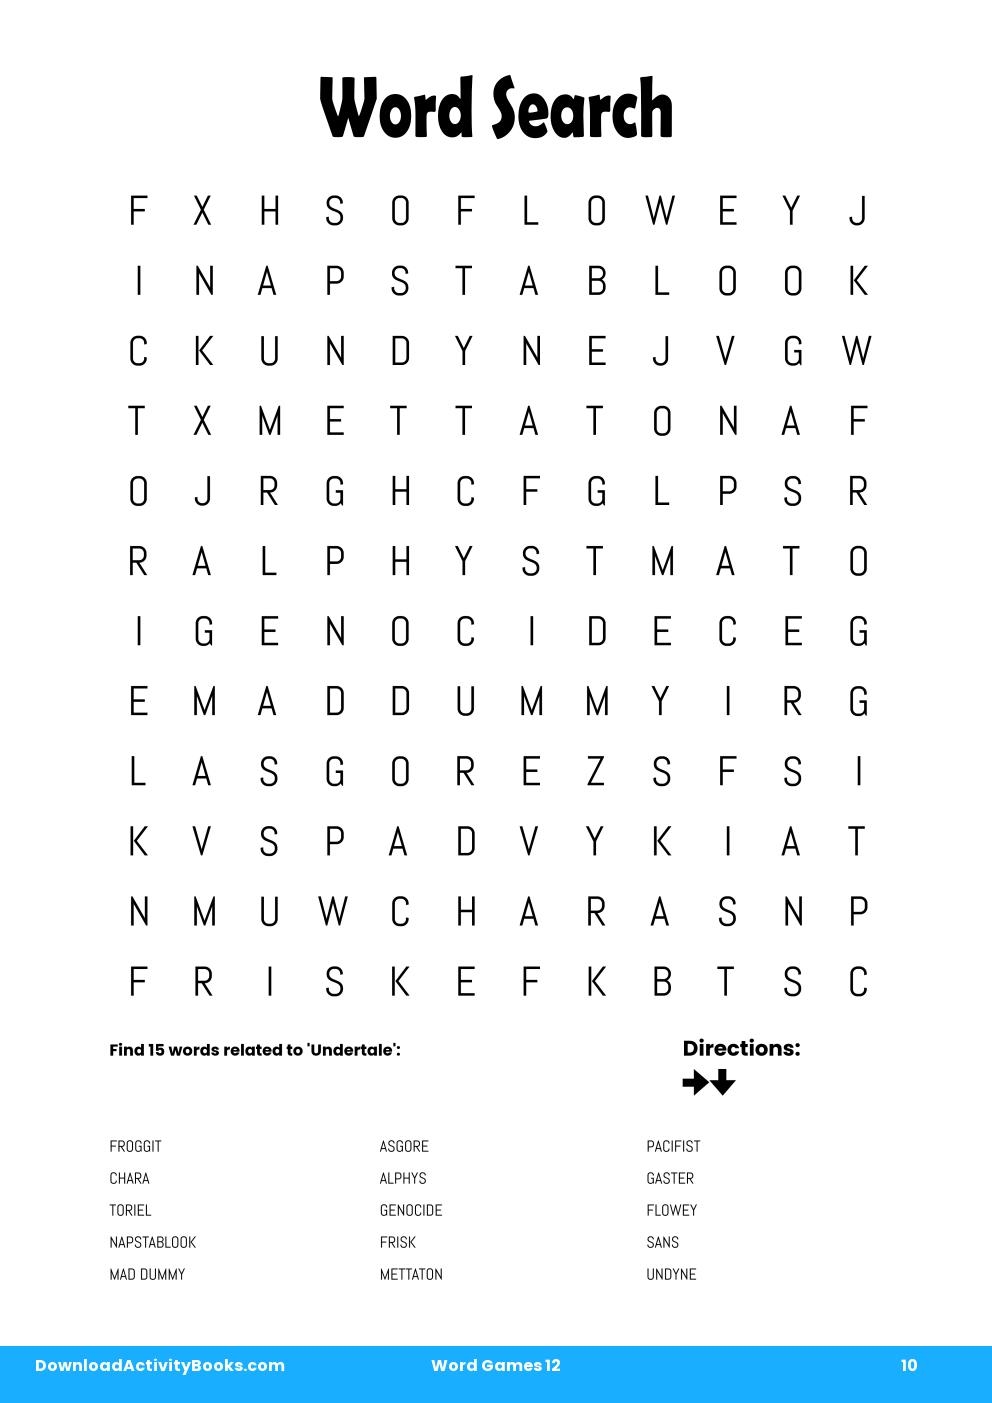 Word Search in Word Games 12